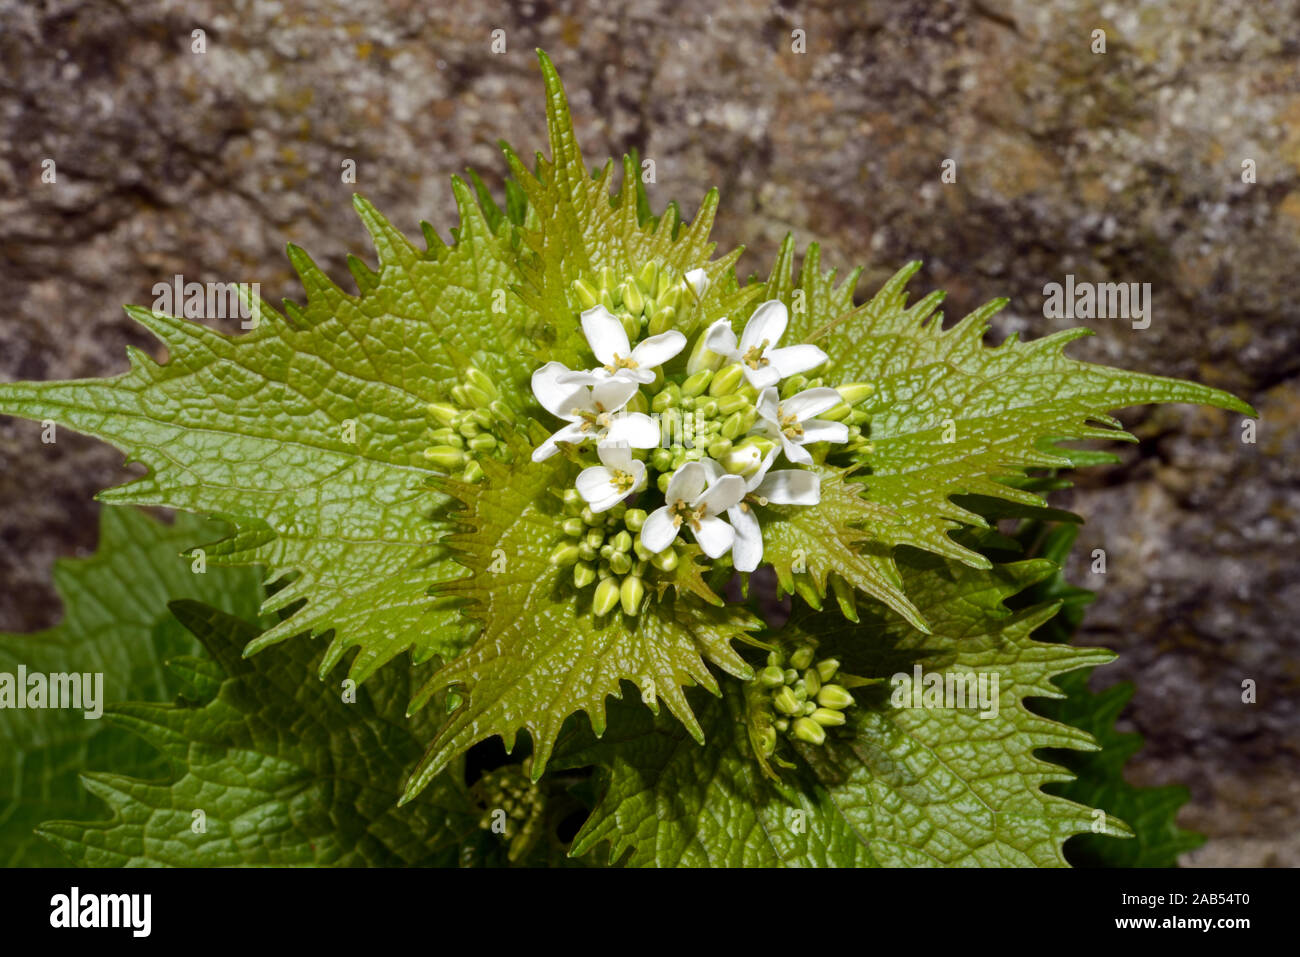 Alliaria petiolata (garlic mustard)  is native to Europe, western and central Asia and north-western Africa. It grows in woodlands and hedgerows. Stock Photo